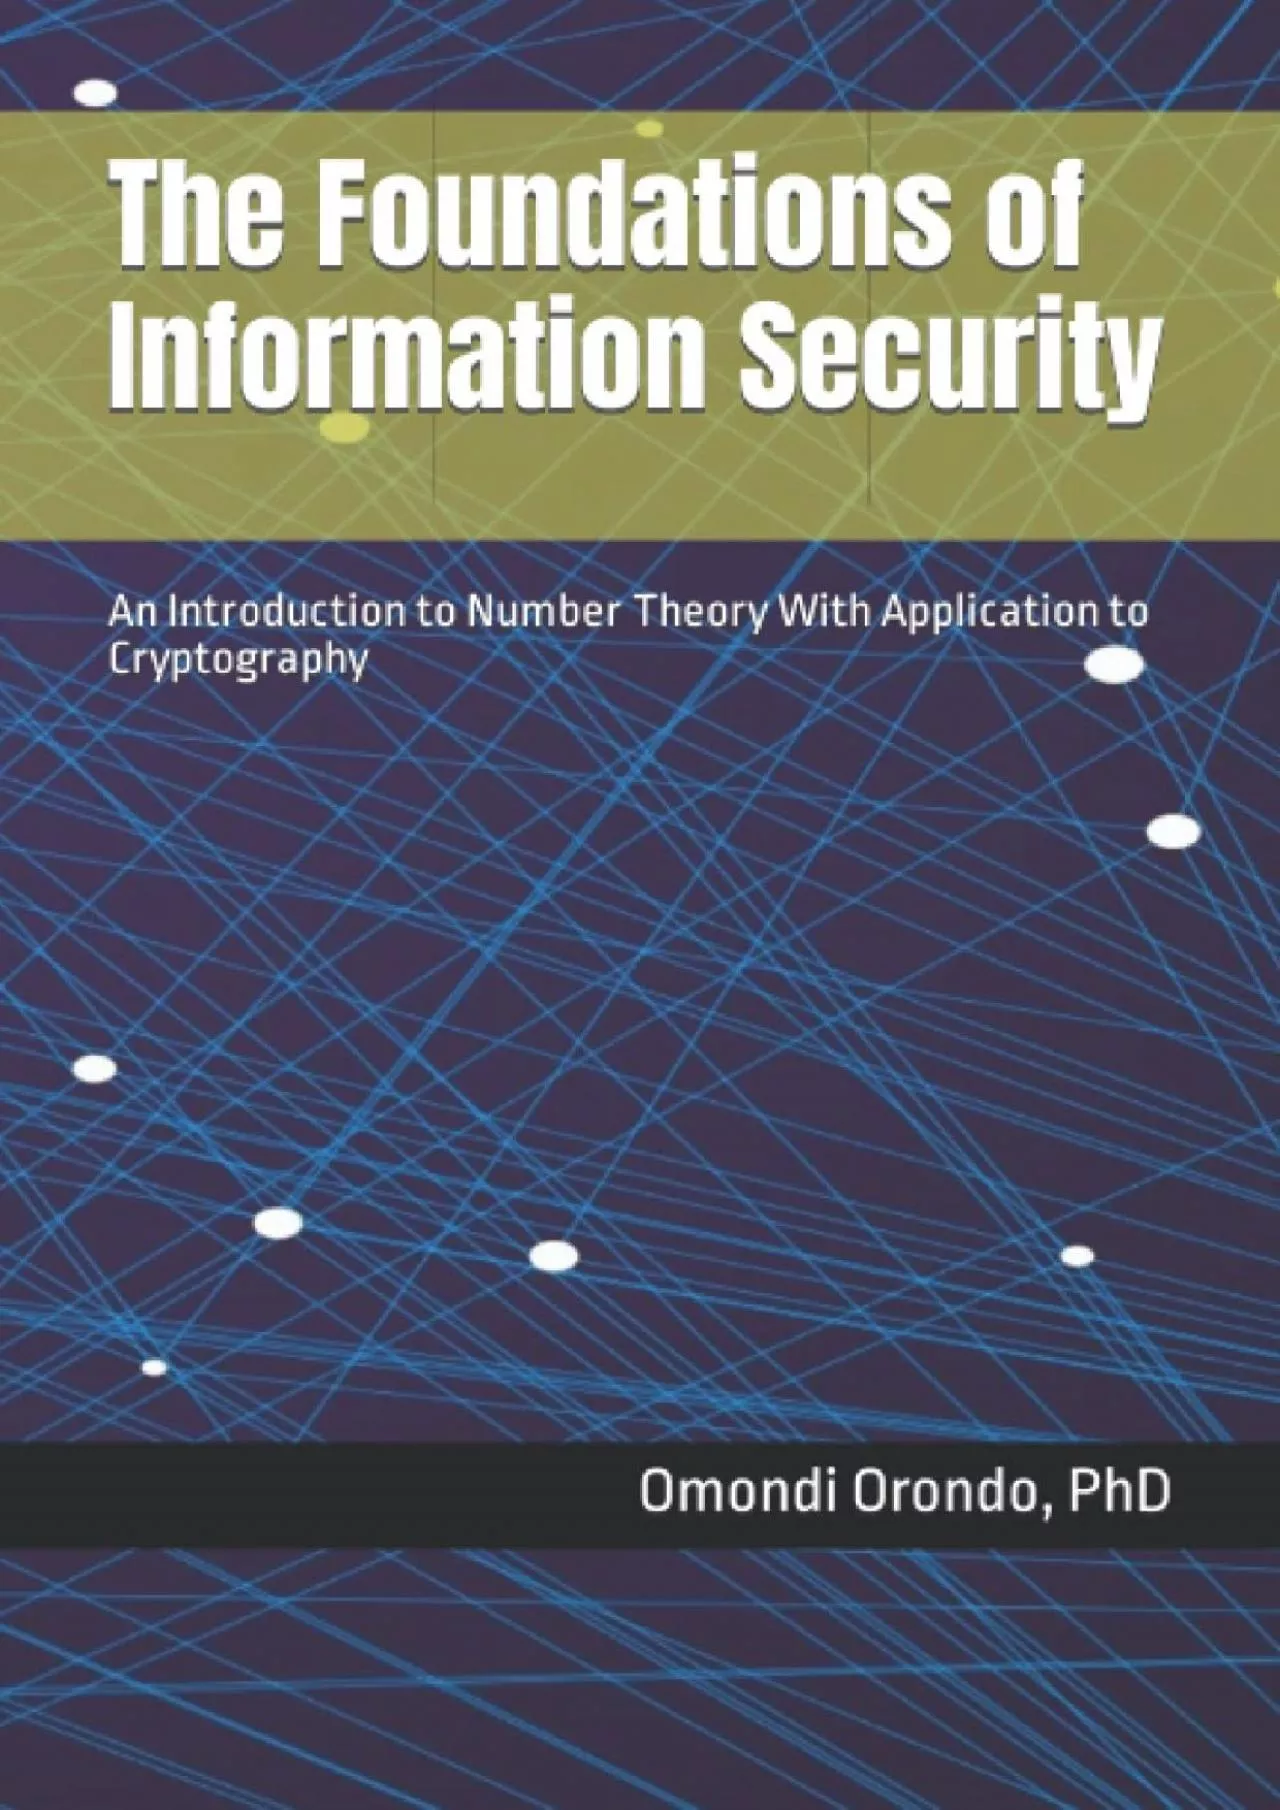 (BOOK)-The Foundations of Information Security: An Introduction to Number Theory With